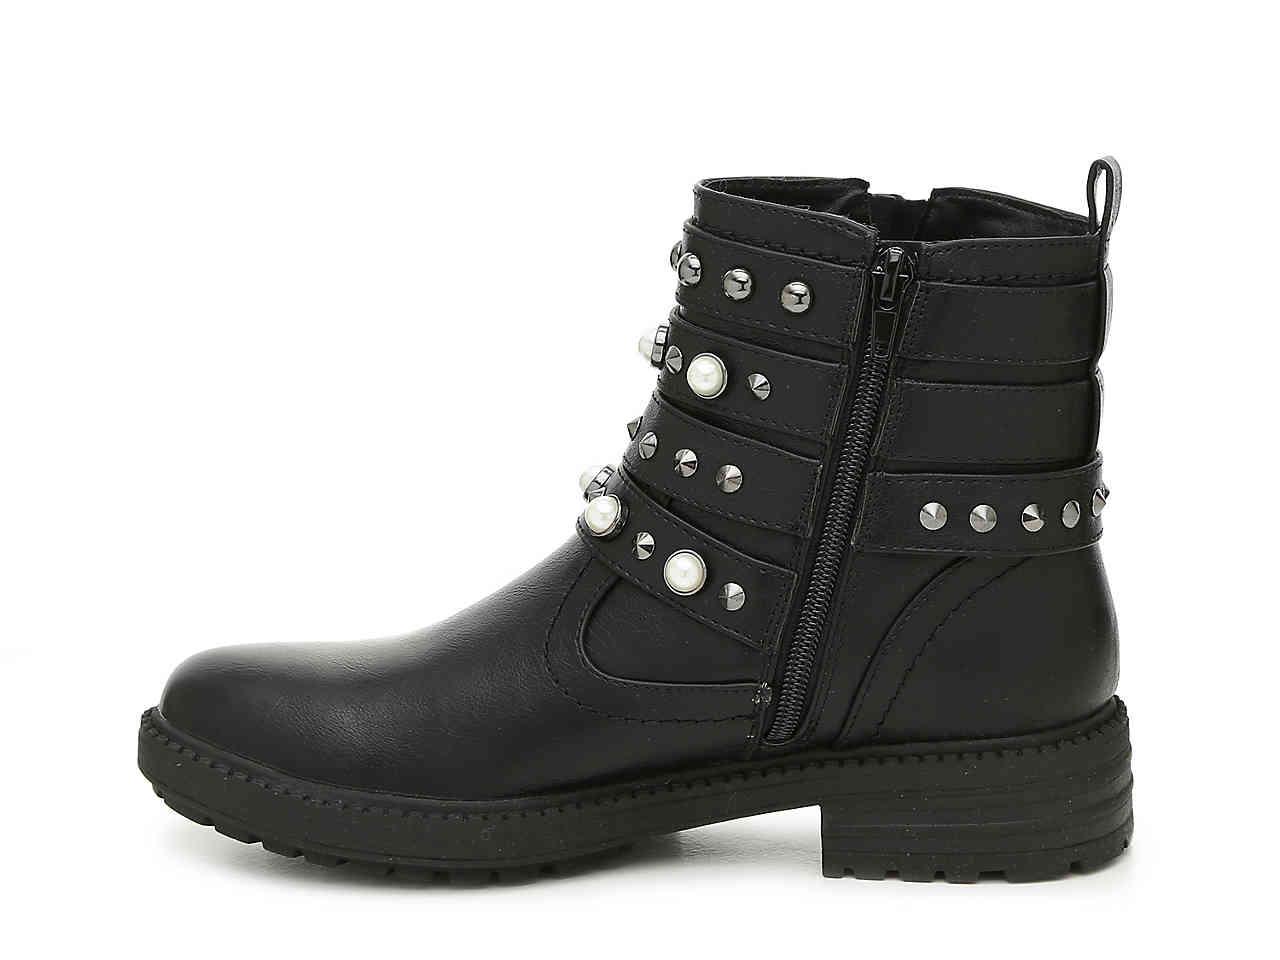 G by Guess Groovi Motorcycle Bootie in 